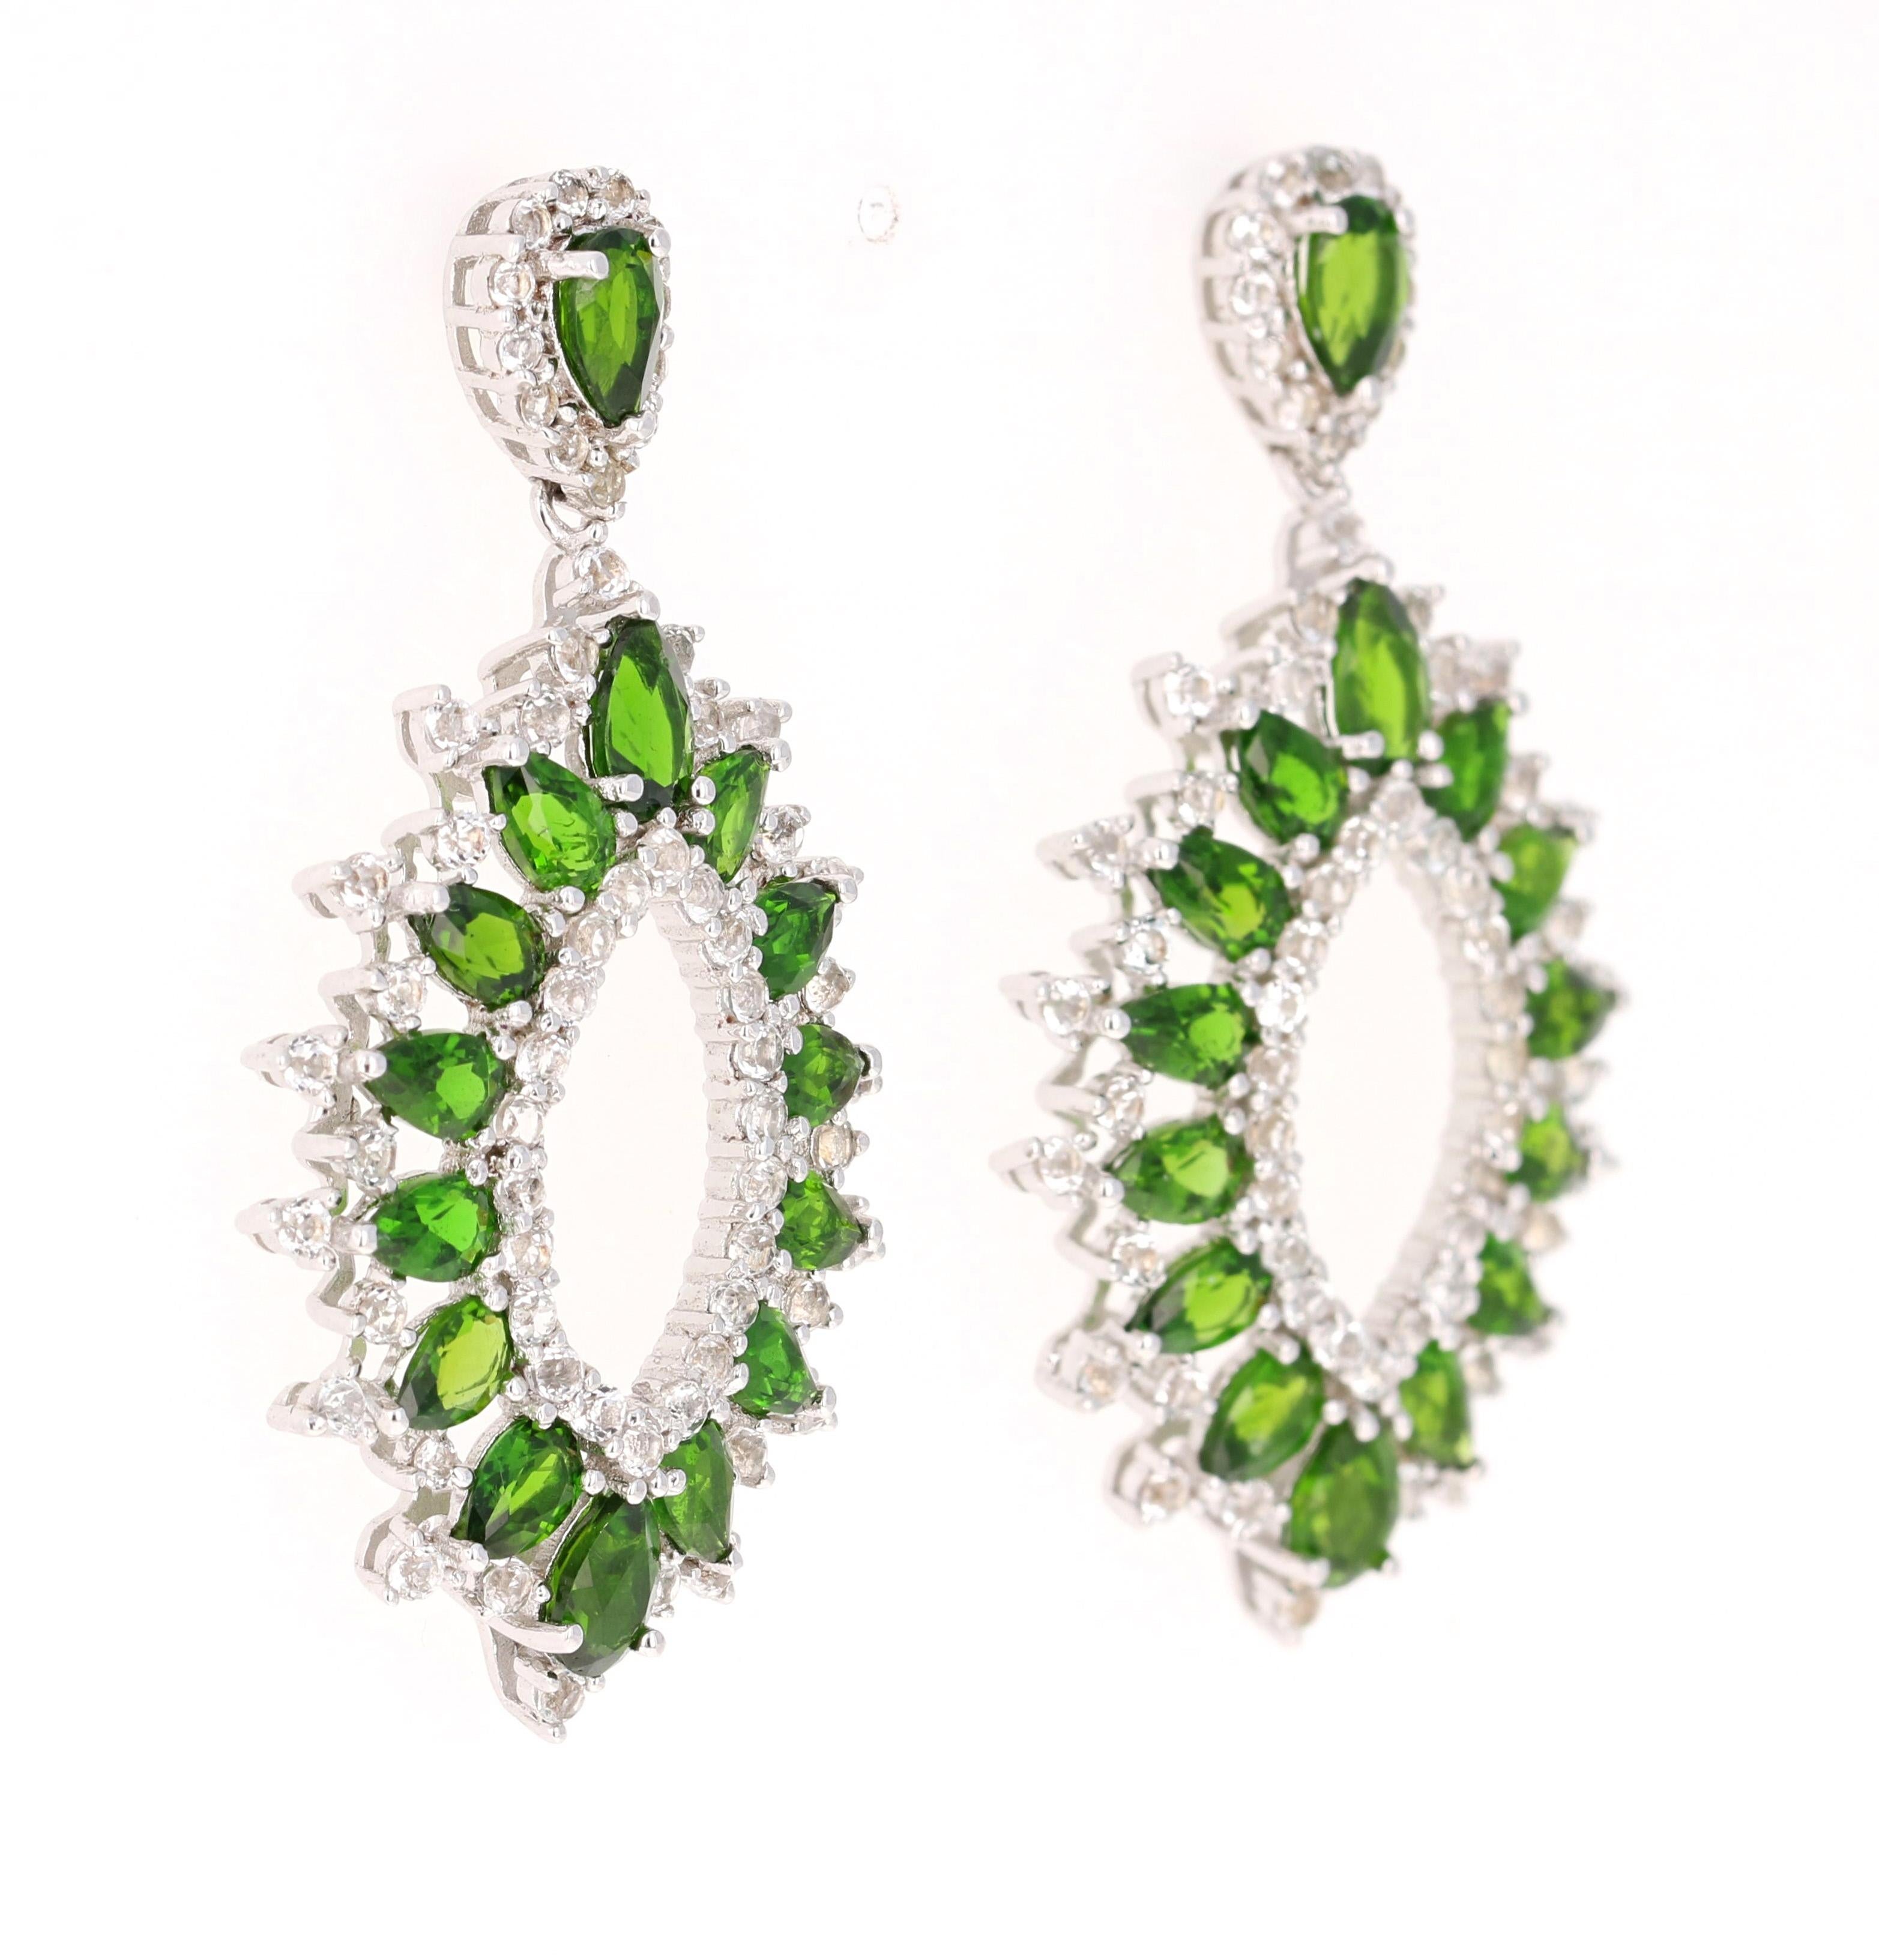 Stunning Chandelier Dangle Earrings 

These earrings have 7.60 Carats of Chrome Diopside and White Topaz

They are beautifully curated in 925 Silver weighing approximately 10.0 grams 

They are 1.75 inches long. 
